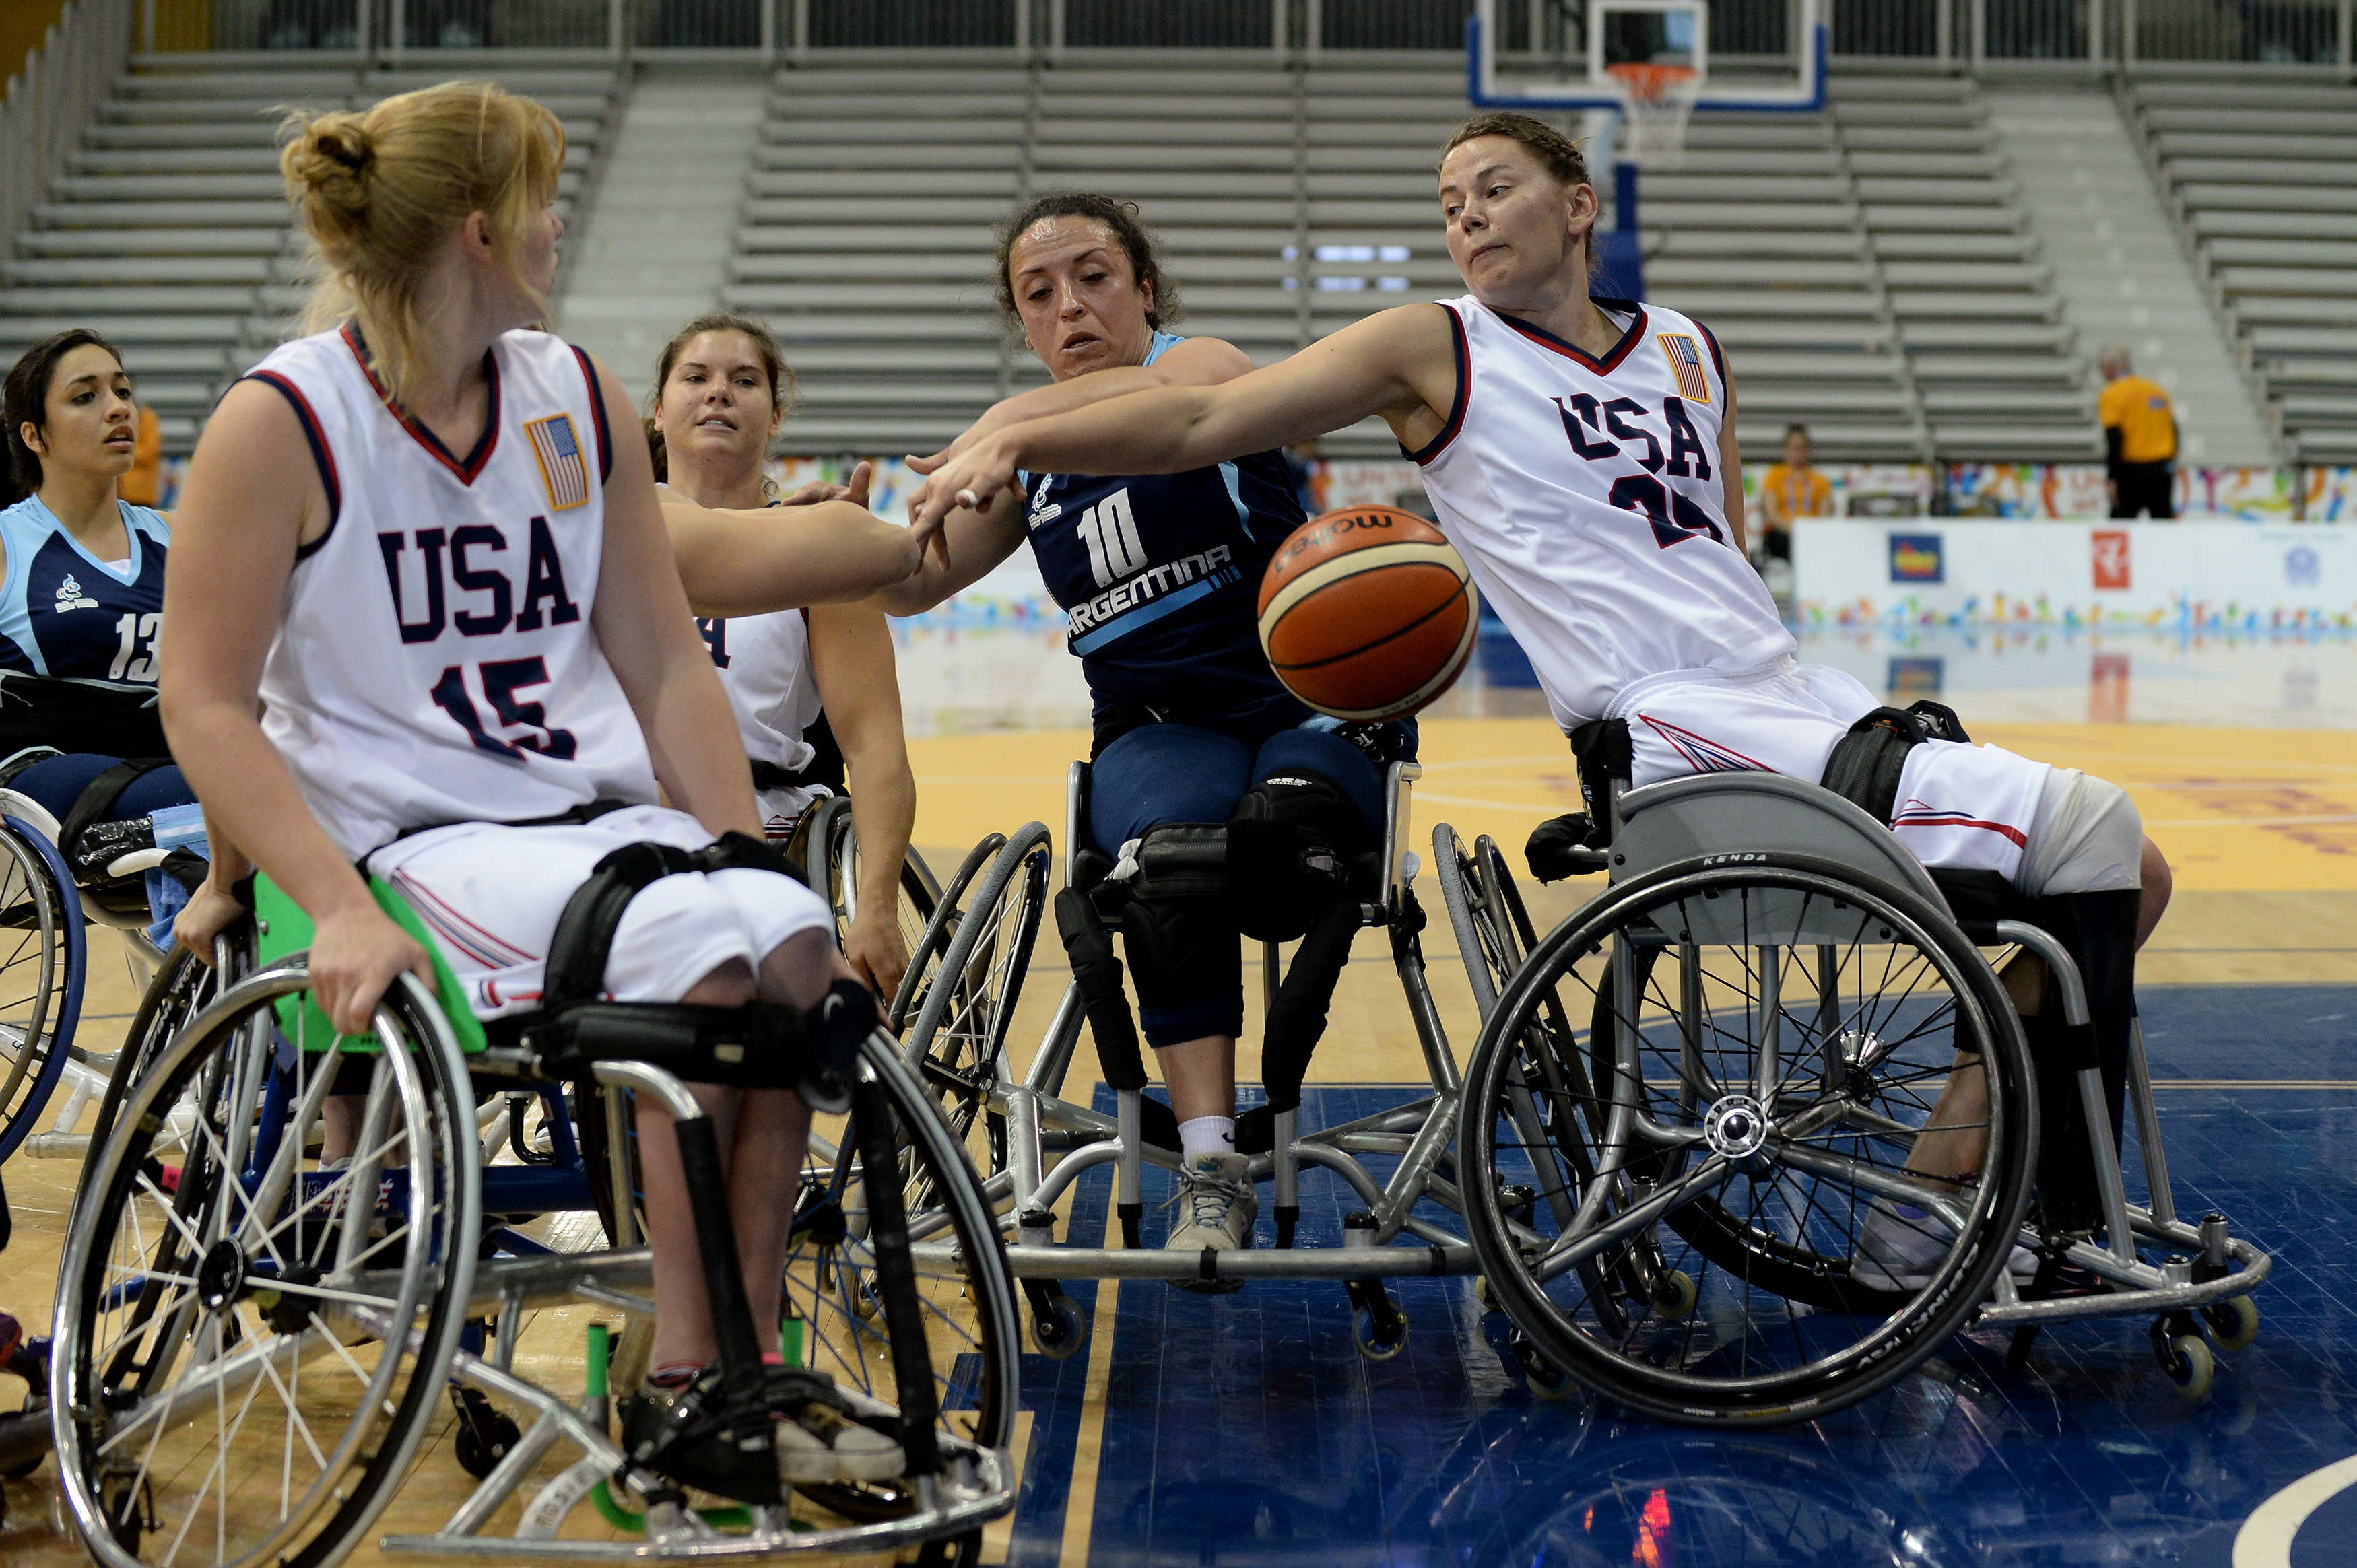 Two women in wheelchairs defending at a basketball game